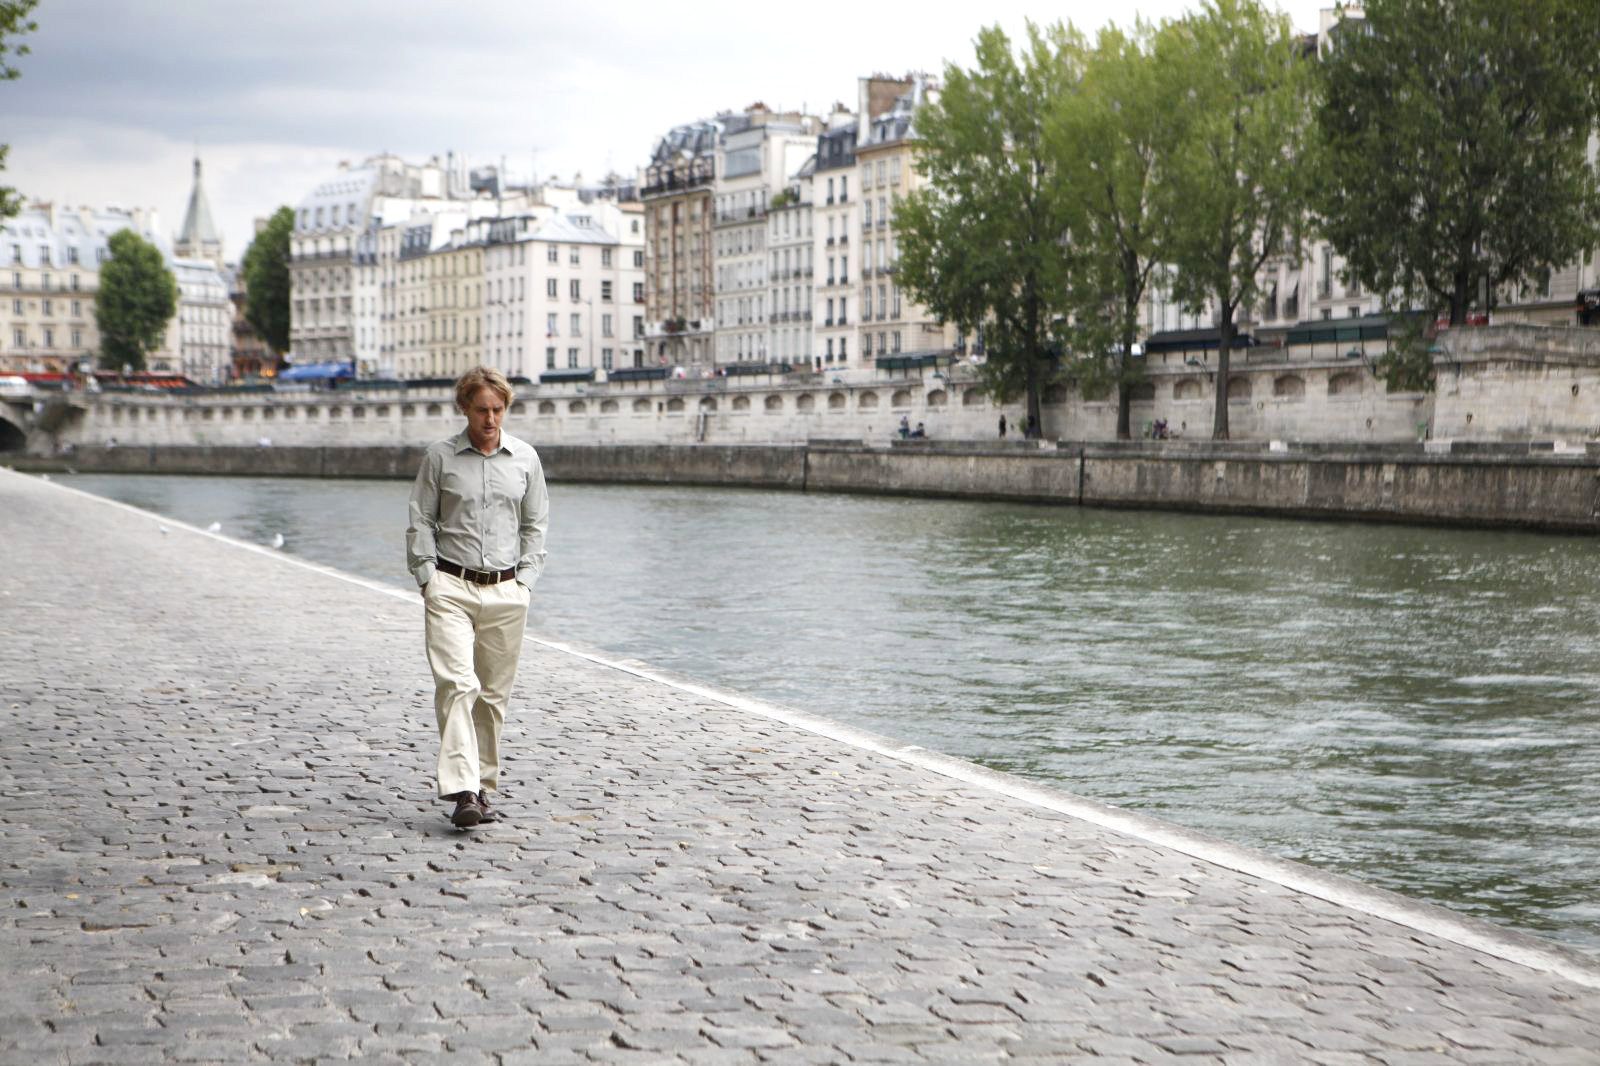 Owen Wilson stars as Gil in Sony Pictures Classics' Midnight in Paris (2011). Photo credit by Roger Arpajou.